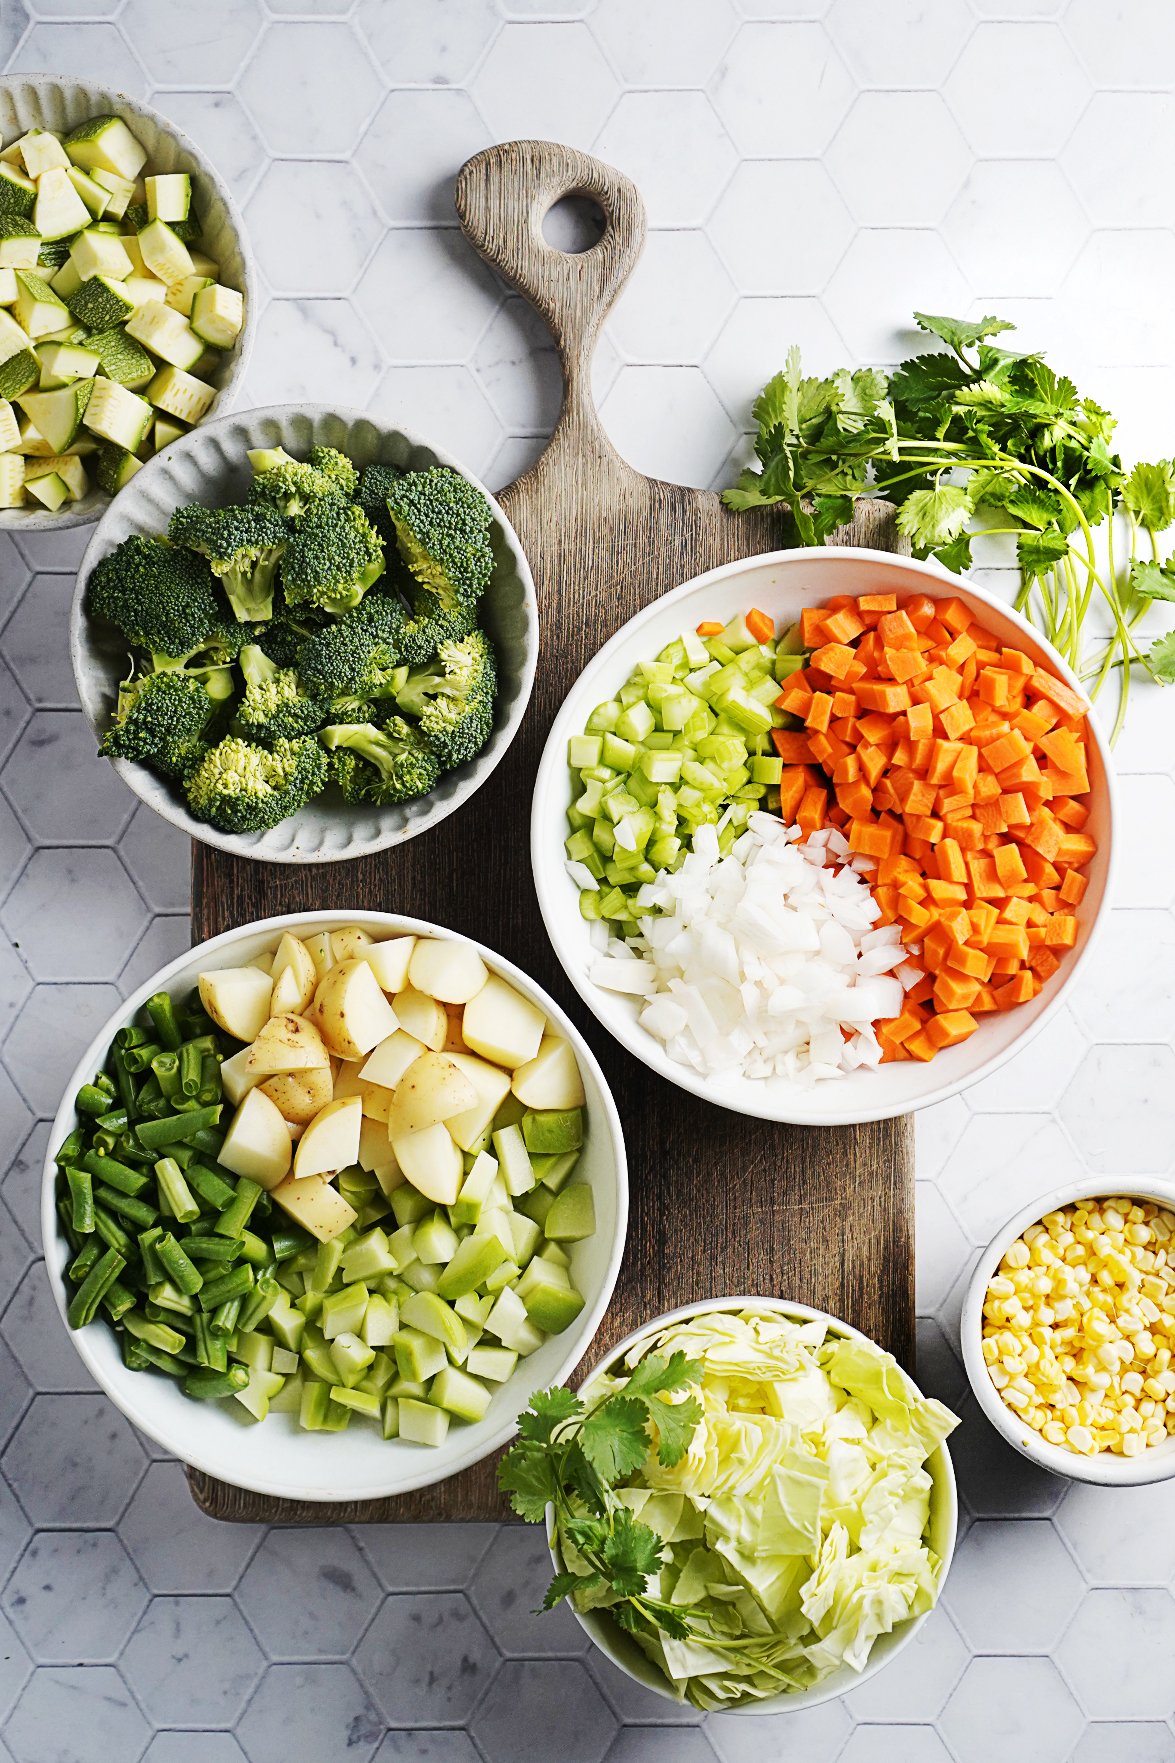 Cut vegetables placed on bowls on a cutting board